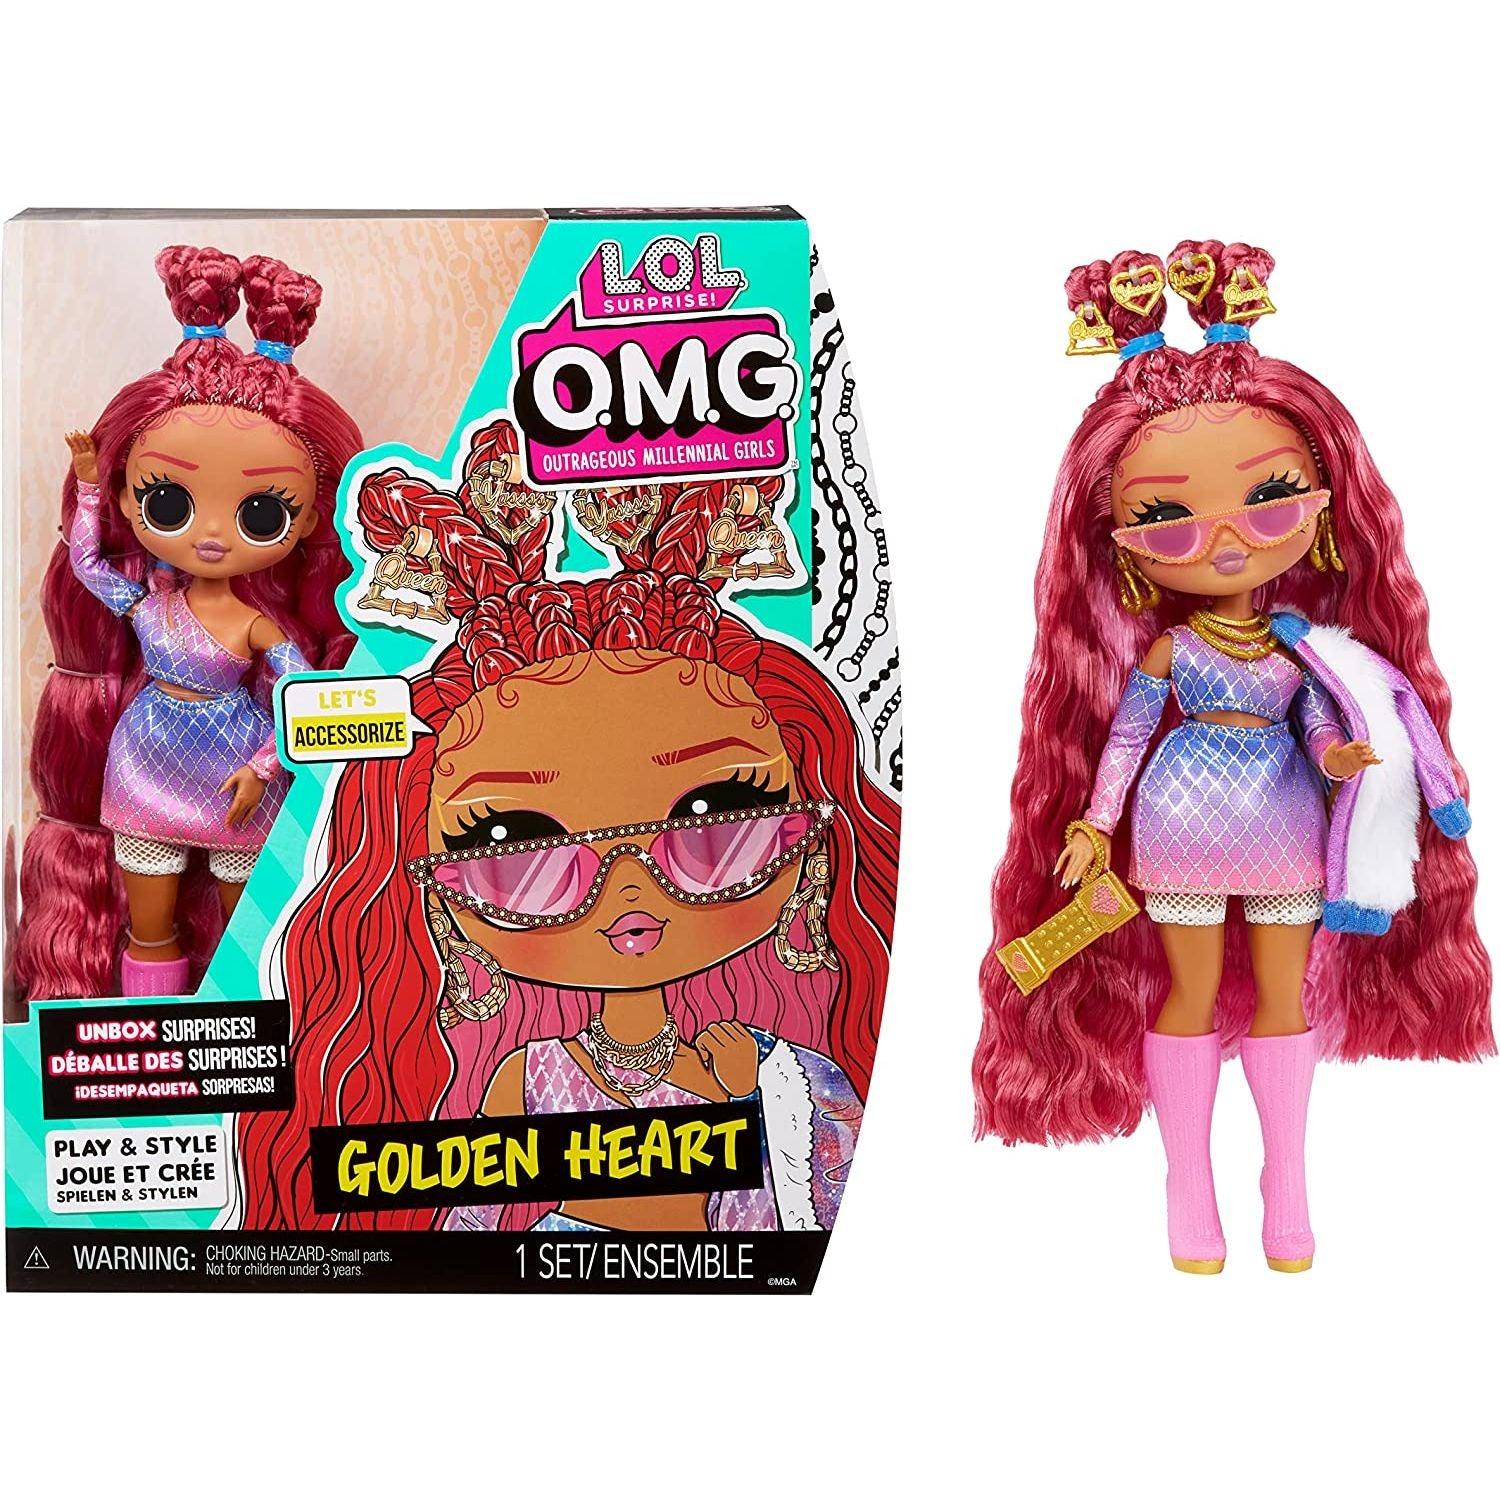 L.O.L. Surprise! O.M.G. Golden Heart Fashion Doll with Multiple Surprises and Fabulous Accessories